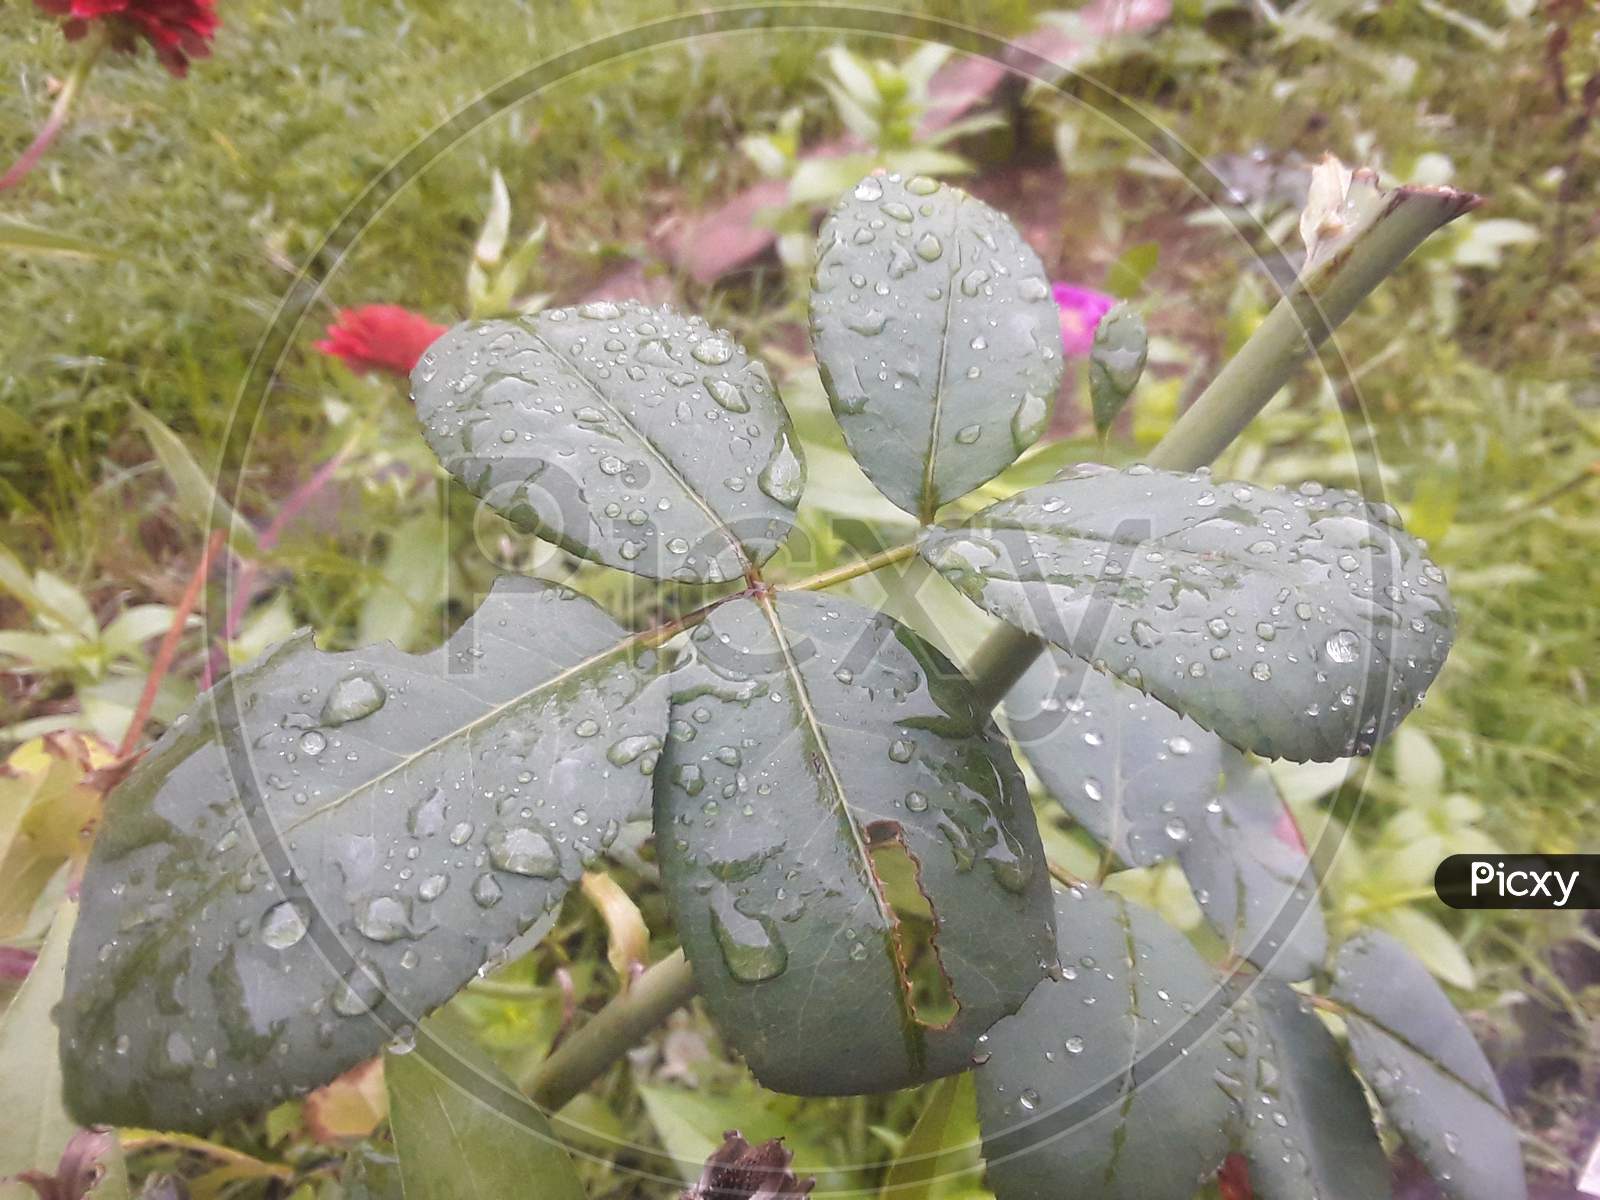 There are drops of water on the rose leaf